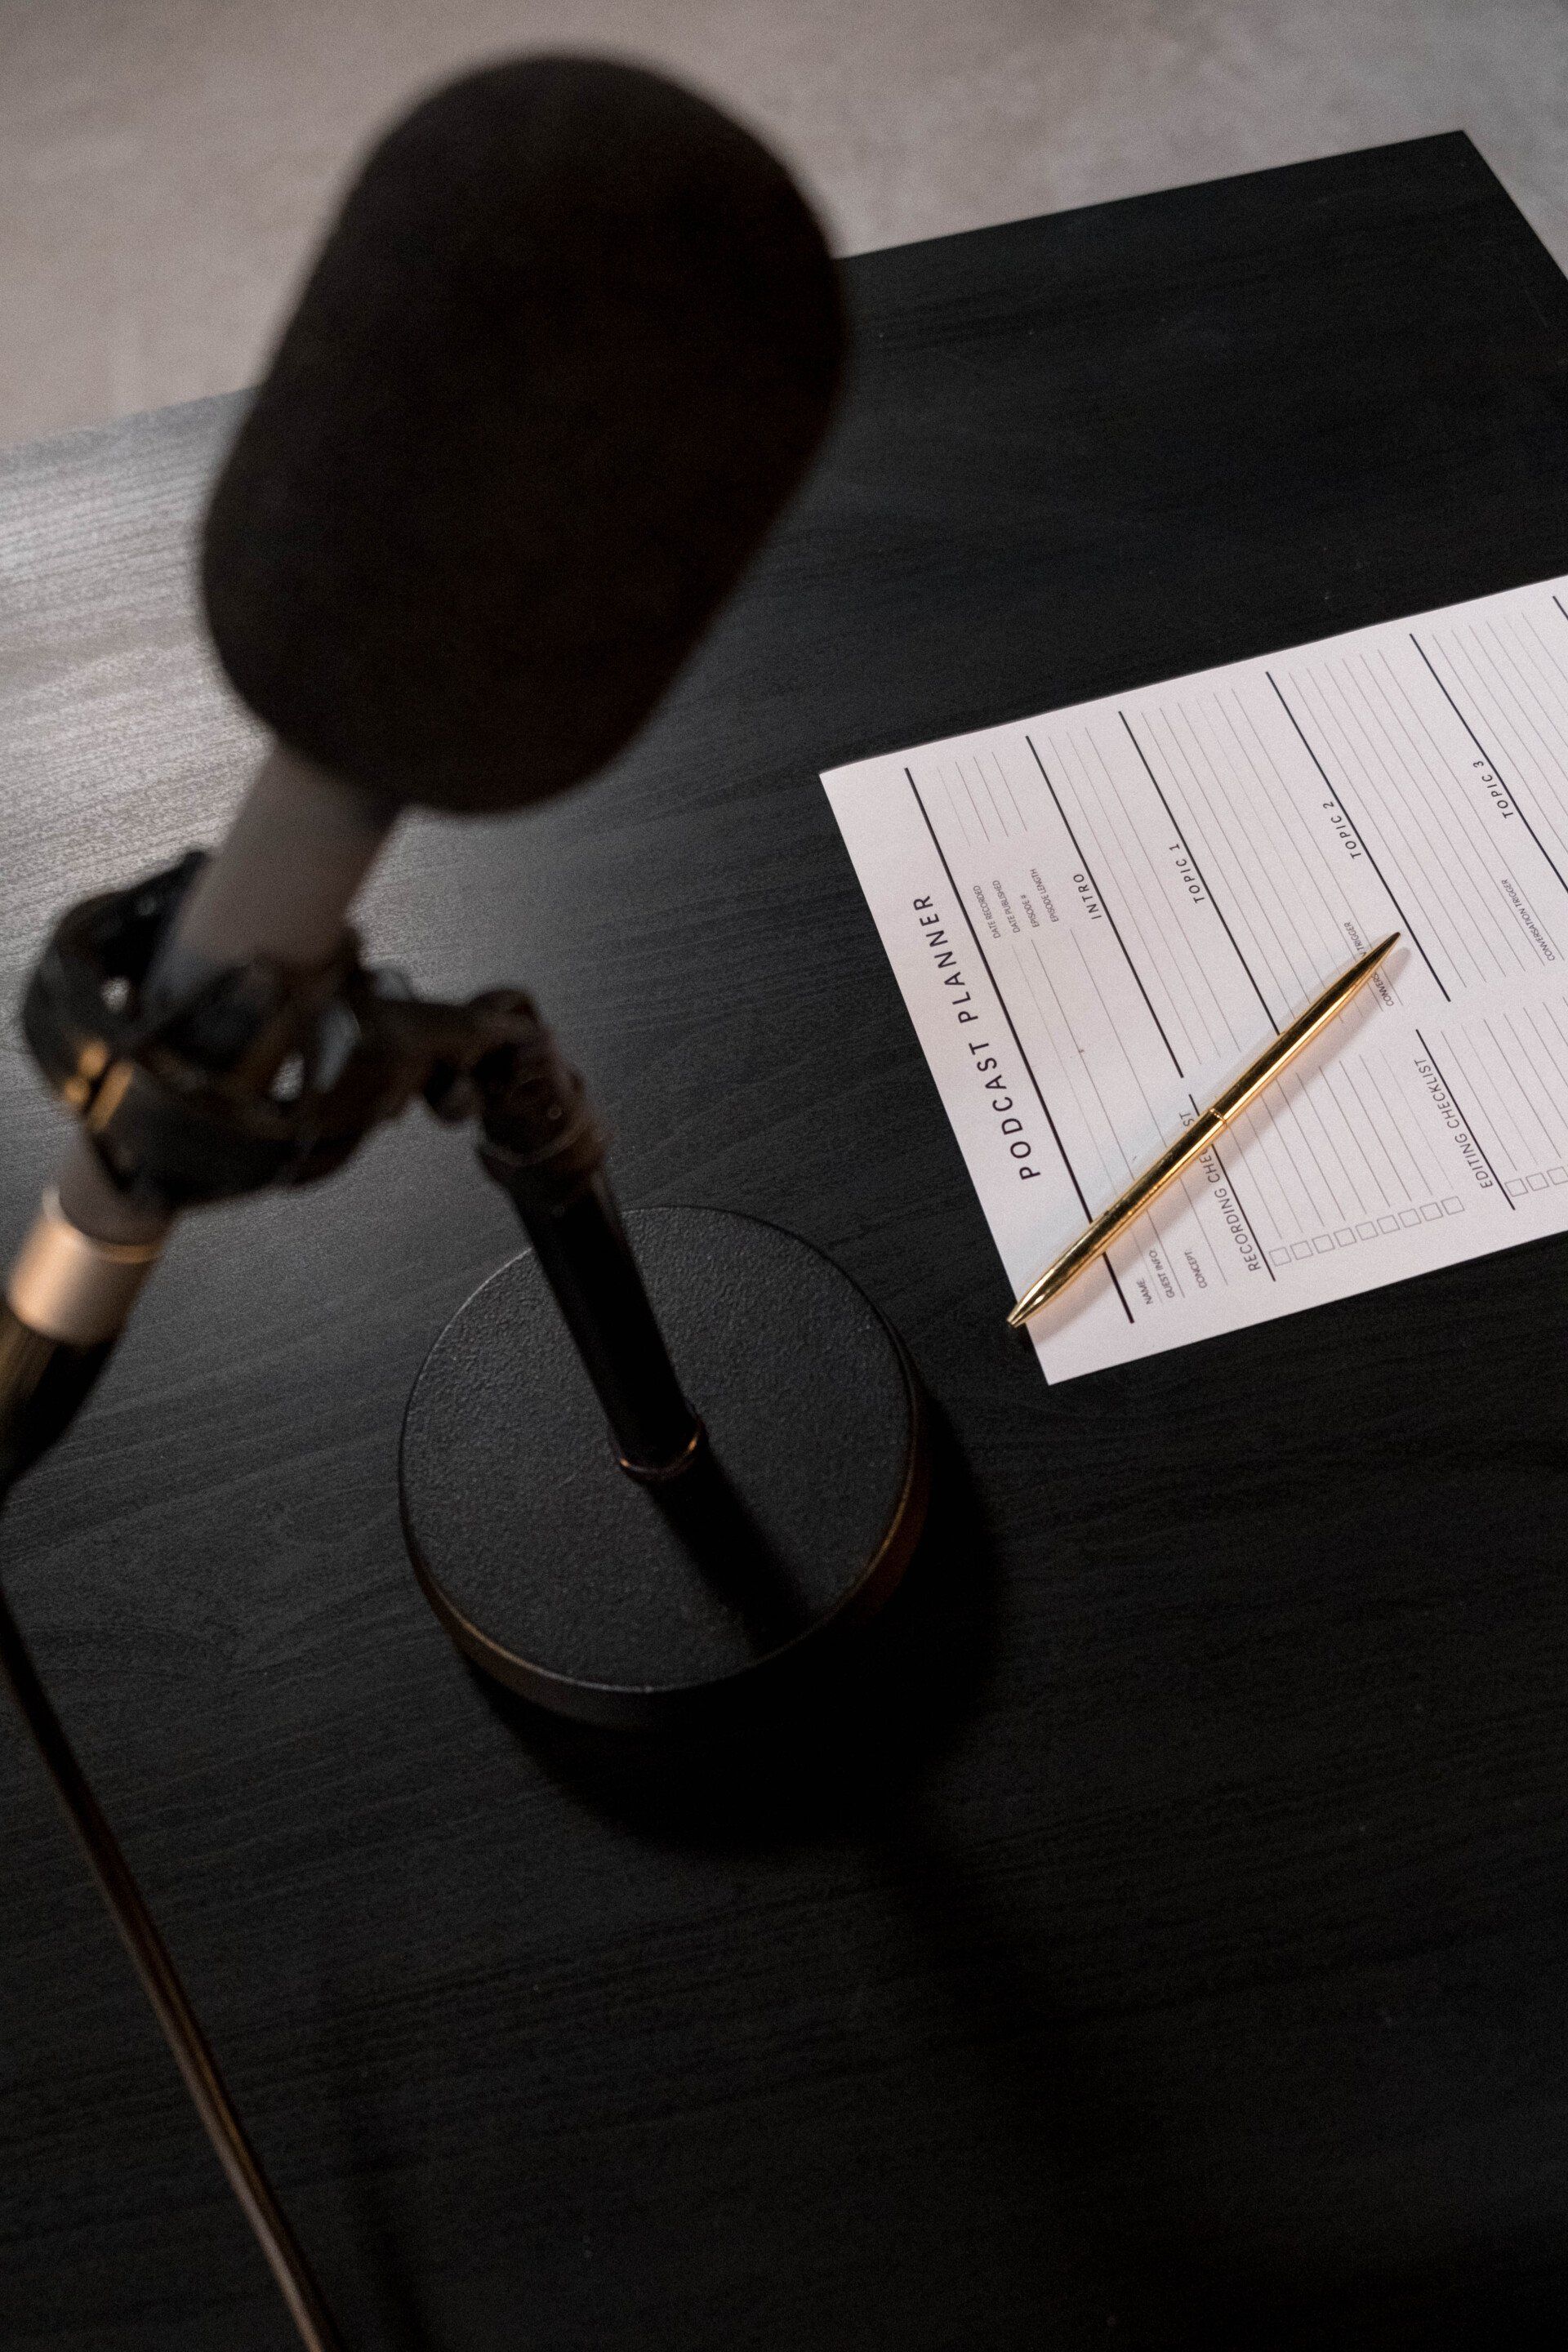 Audit process: a microphone is sitting on a table next to a pen